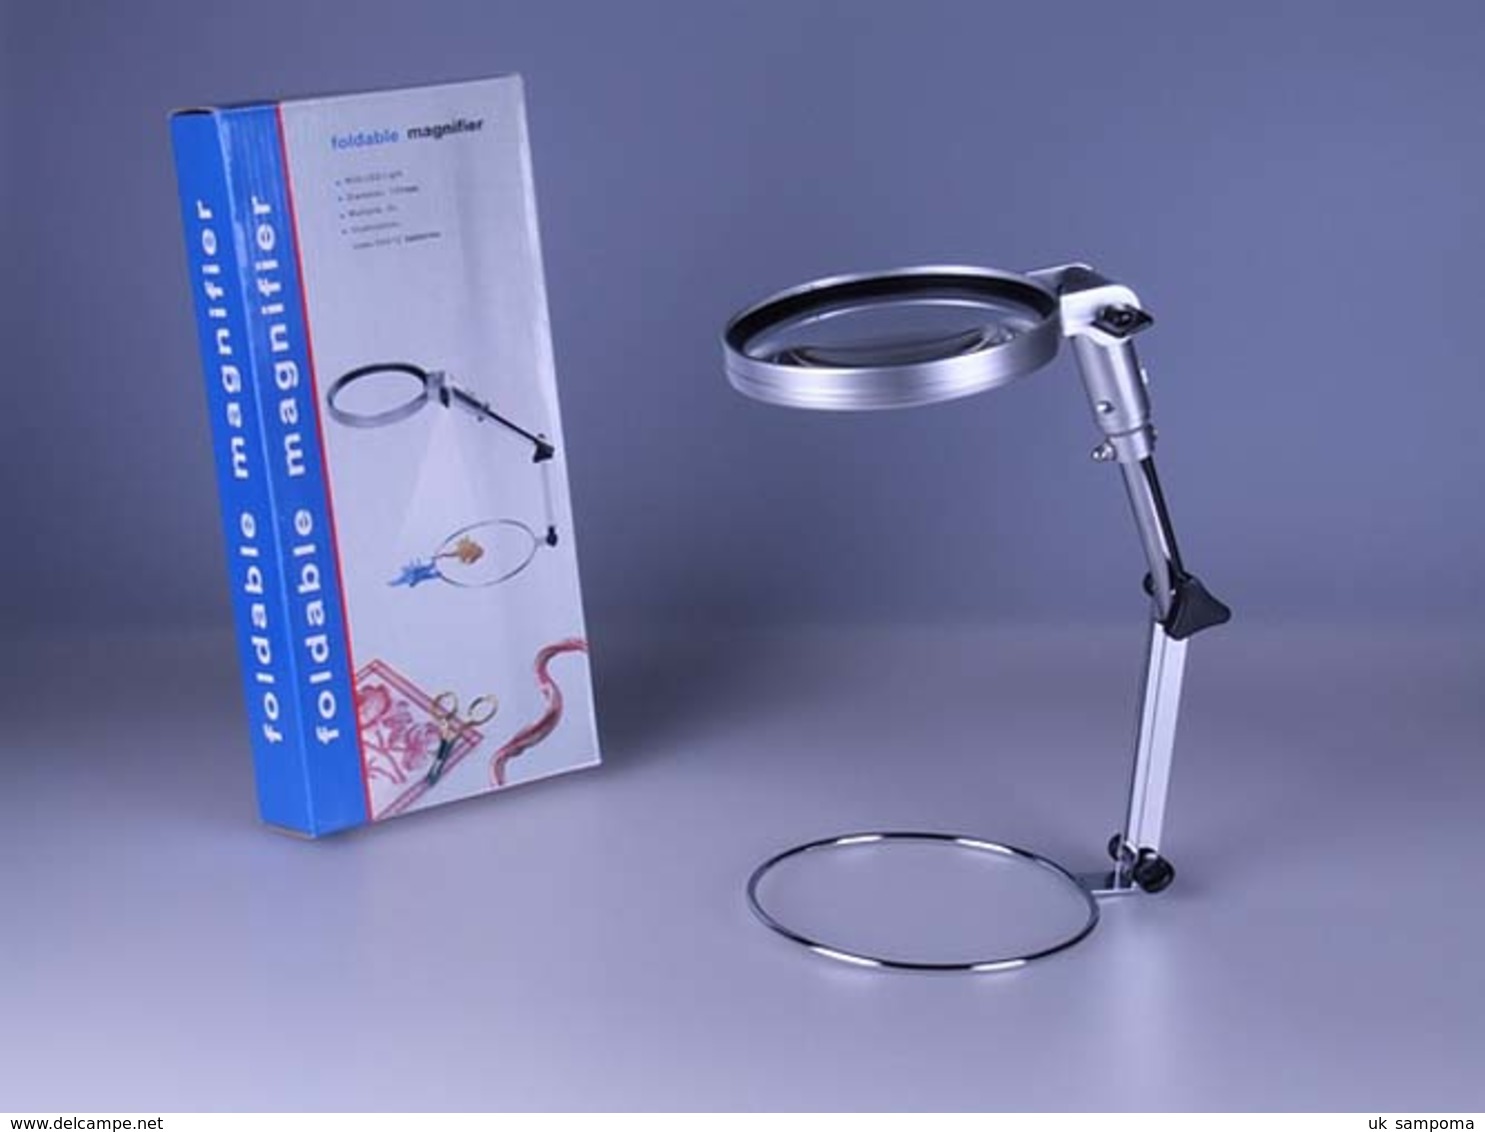 Importa (0612) Importa 0612 Foldable Light Magnifier MG83024-2 - Stamp Tongs, Magnifiers And Microscopes